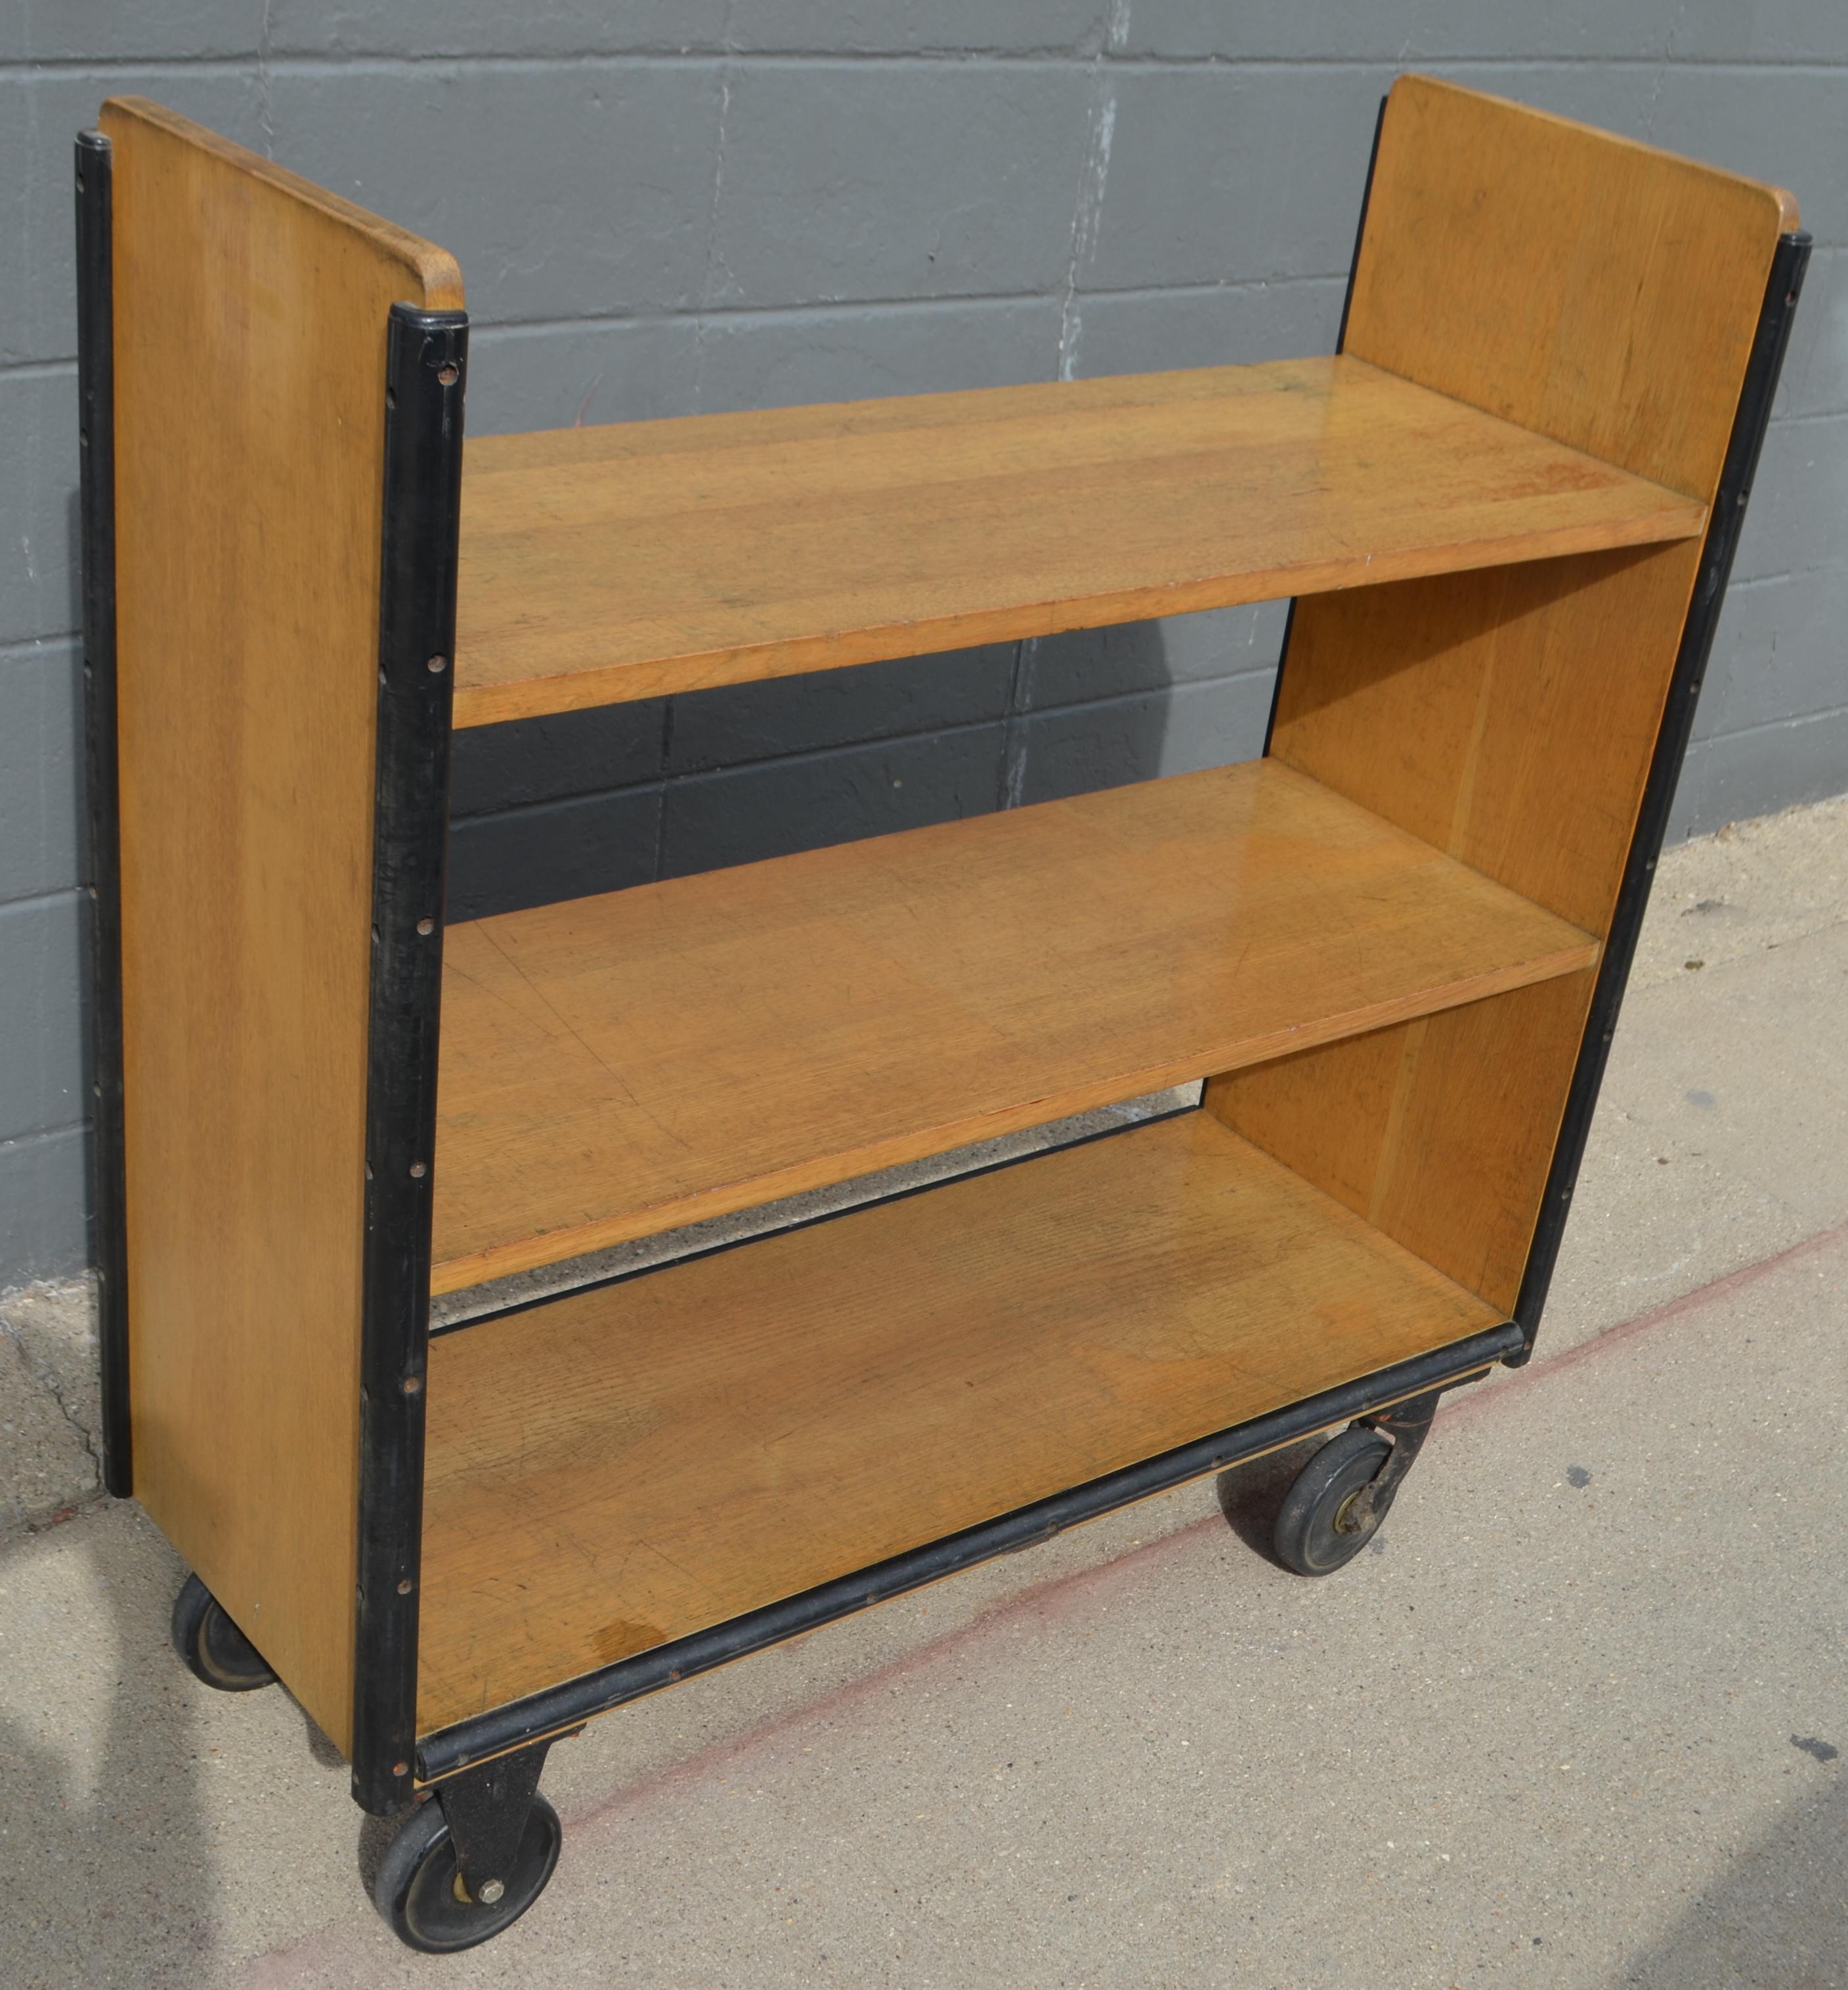 Midcentury book cart of oak on wheels with rubber bumpers. From midwestern public library. Restored, cleaned and sealed. Functions for storage of books, CDs and DVDs. Use it in the bathroom for towels and accessories. Or in the kitchen for cookbooks